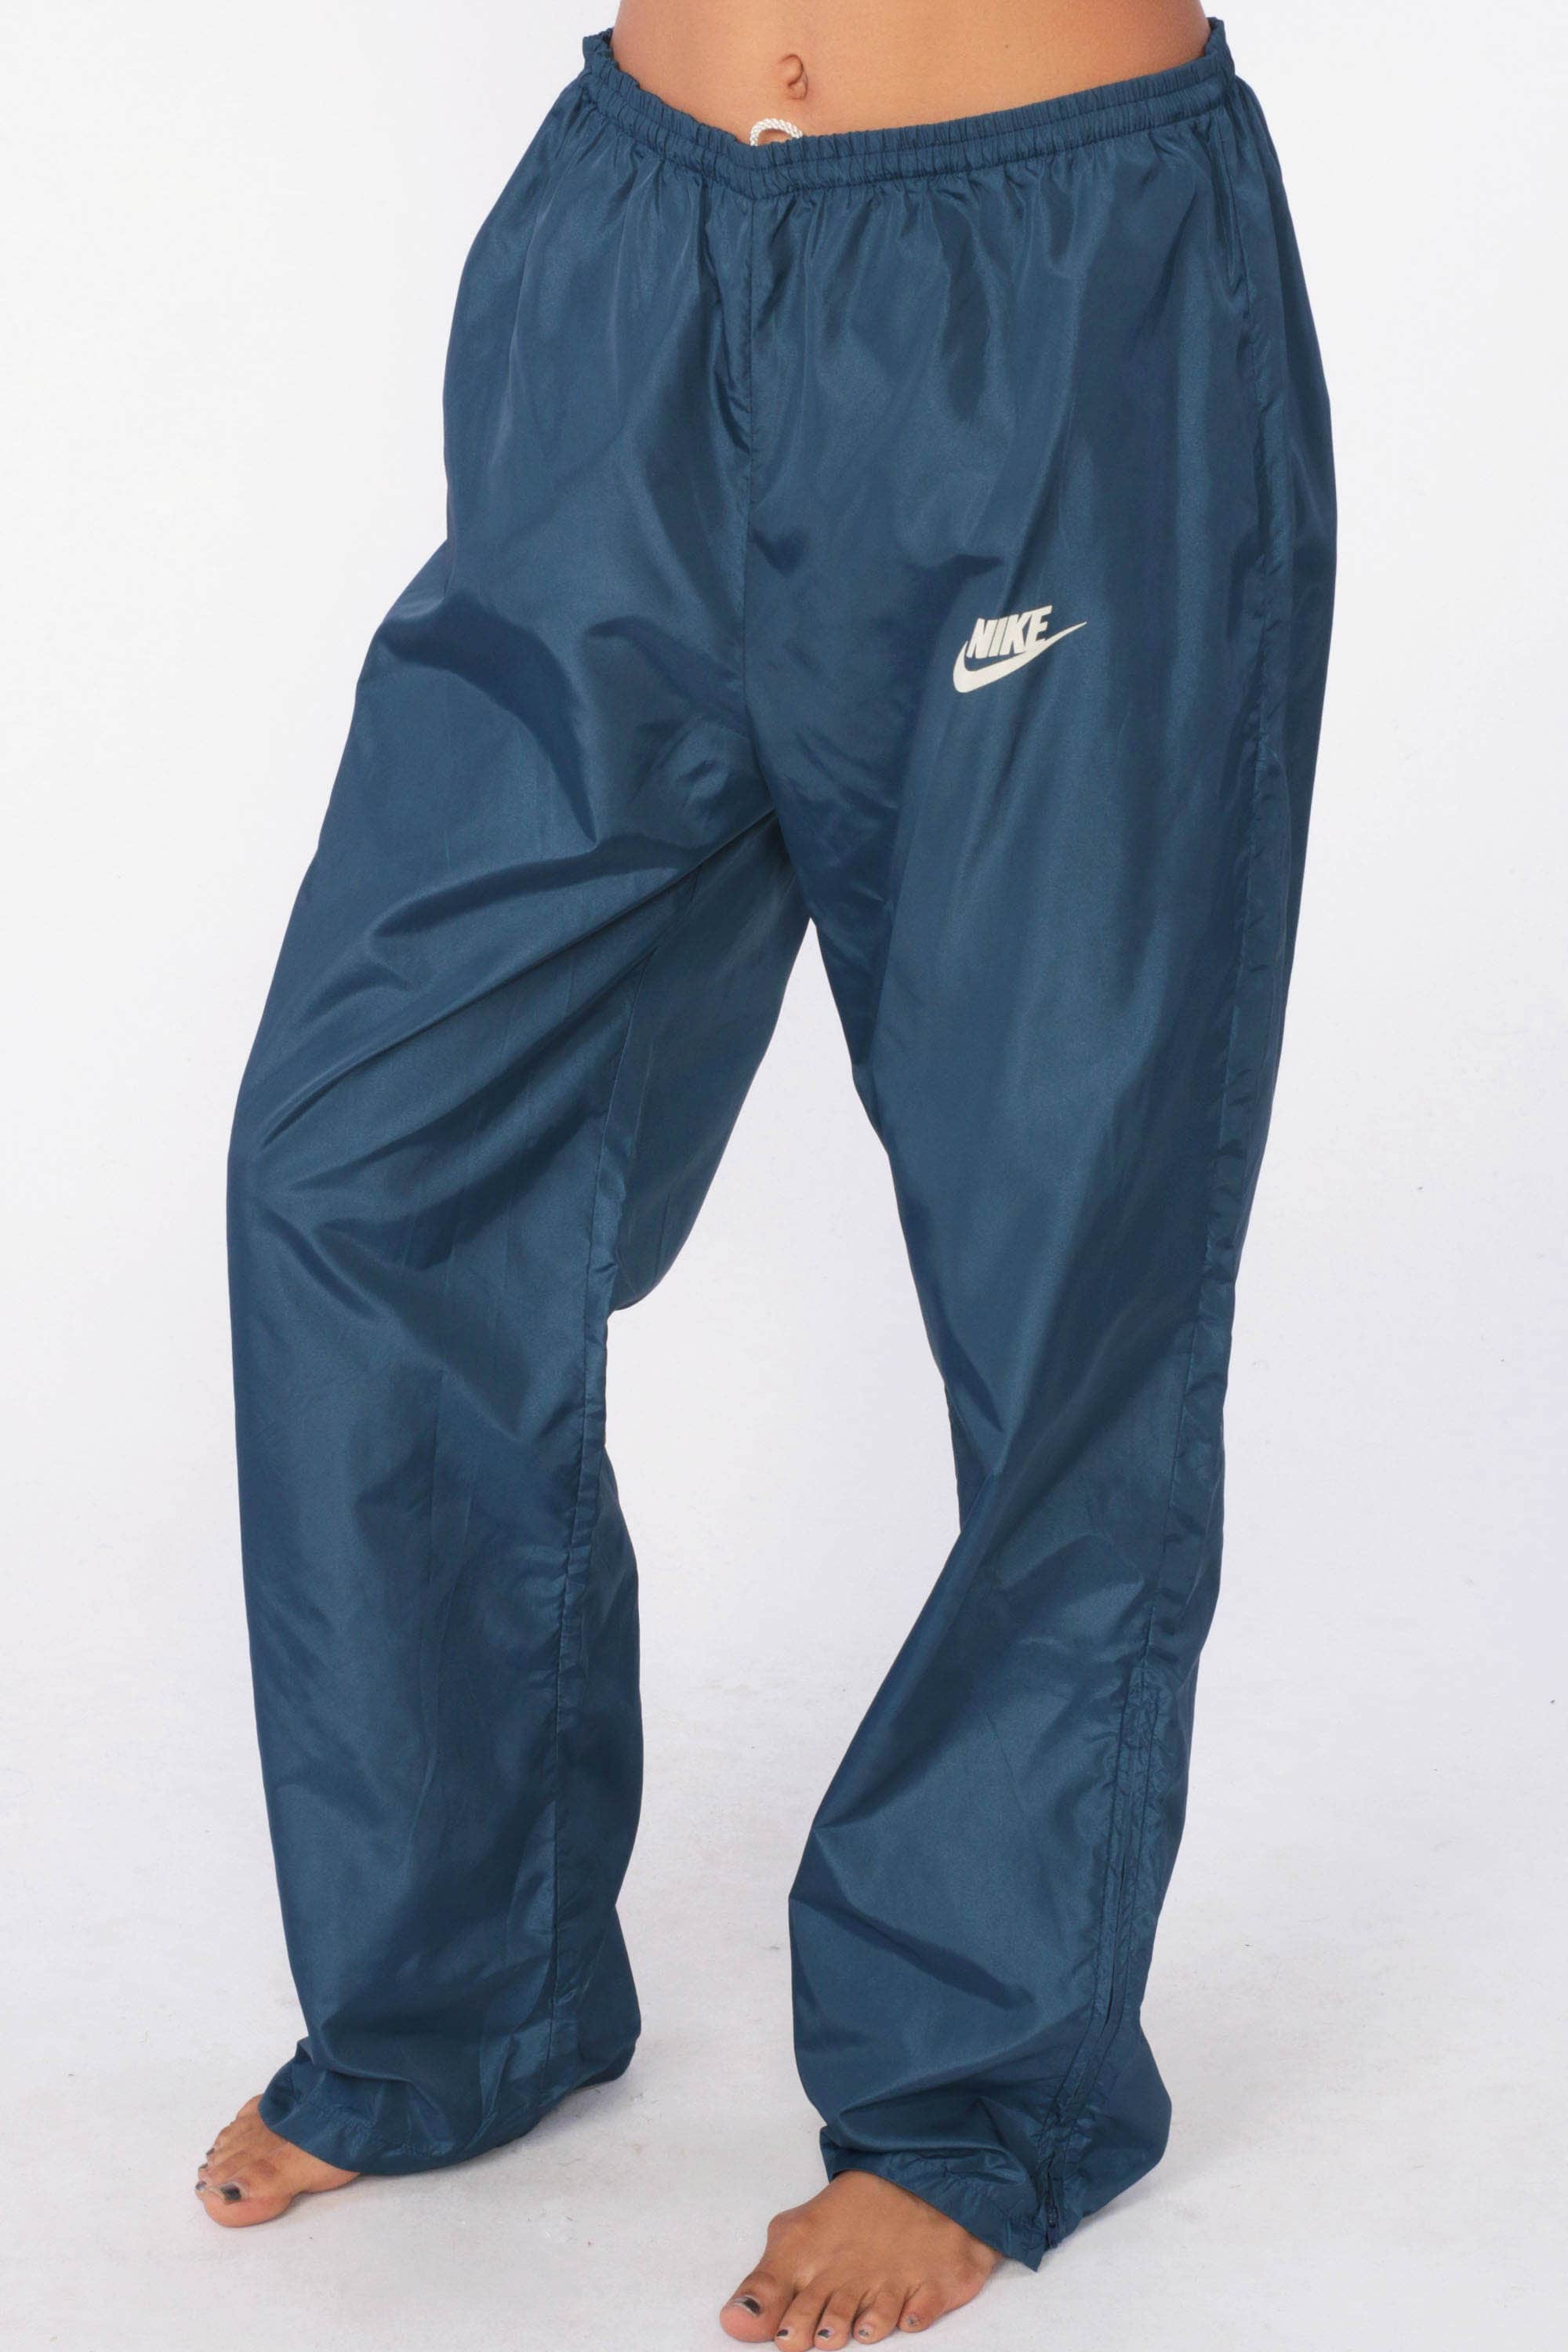 90s NIKE Track Pants 90s Joggers Navy Blue Baggy Jogging Track Suit